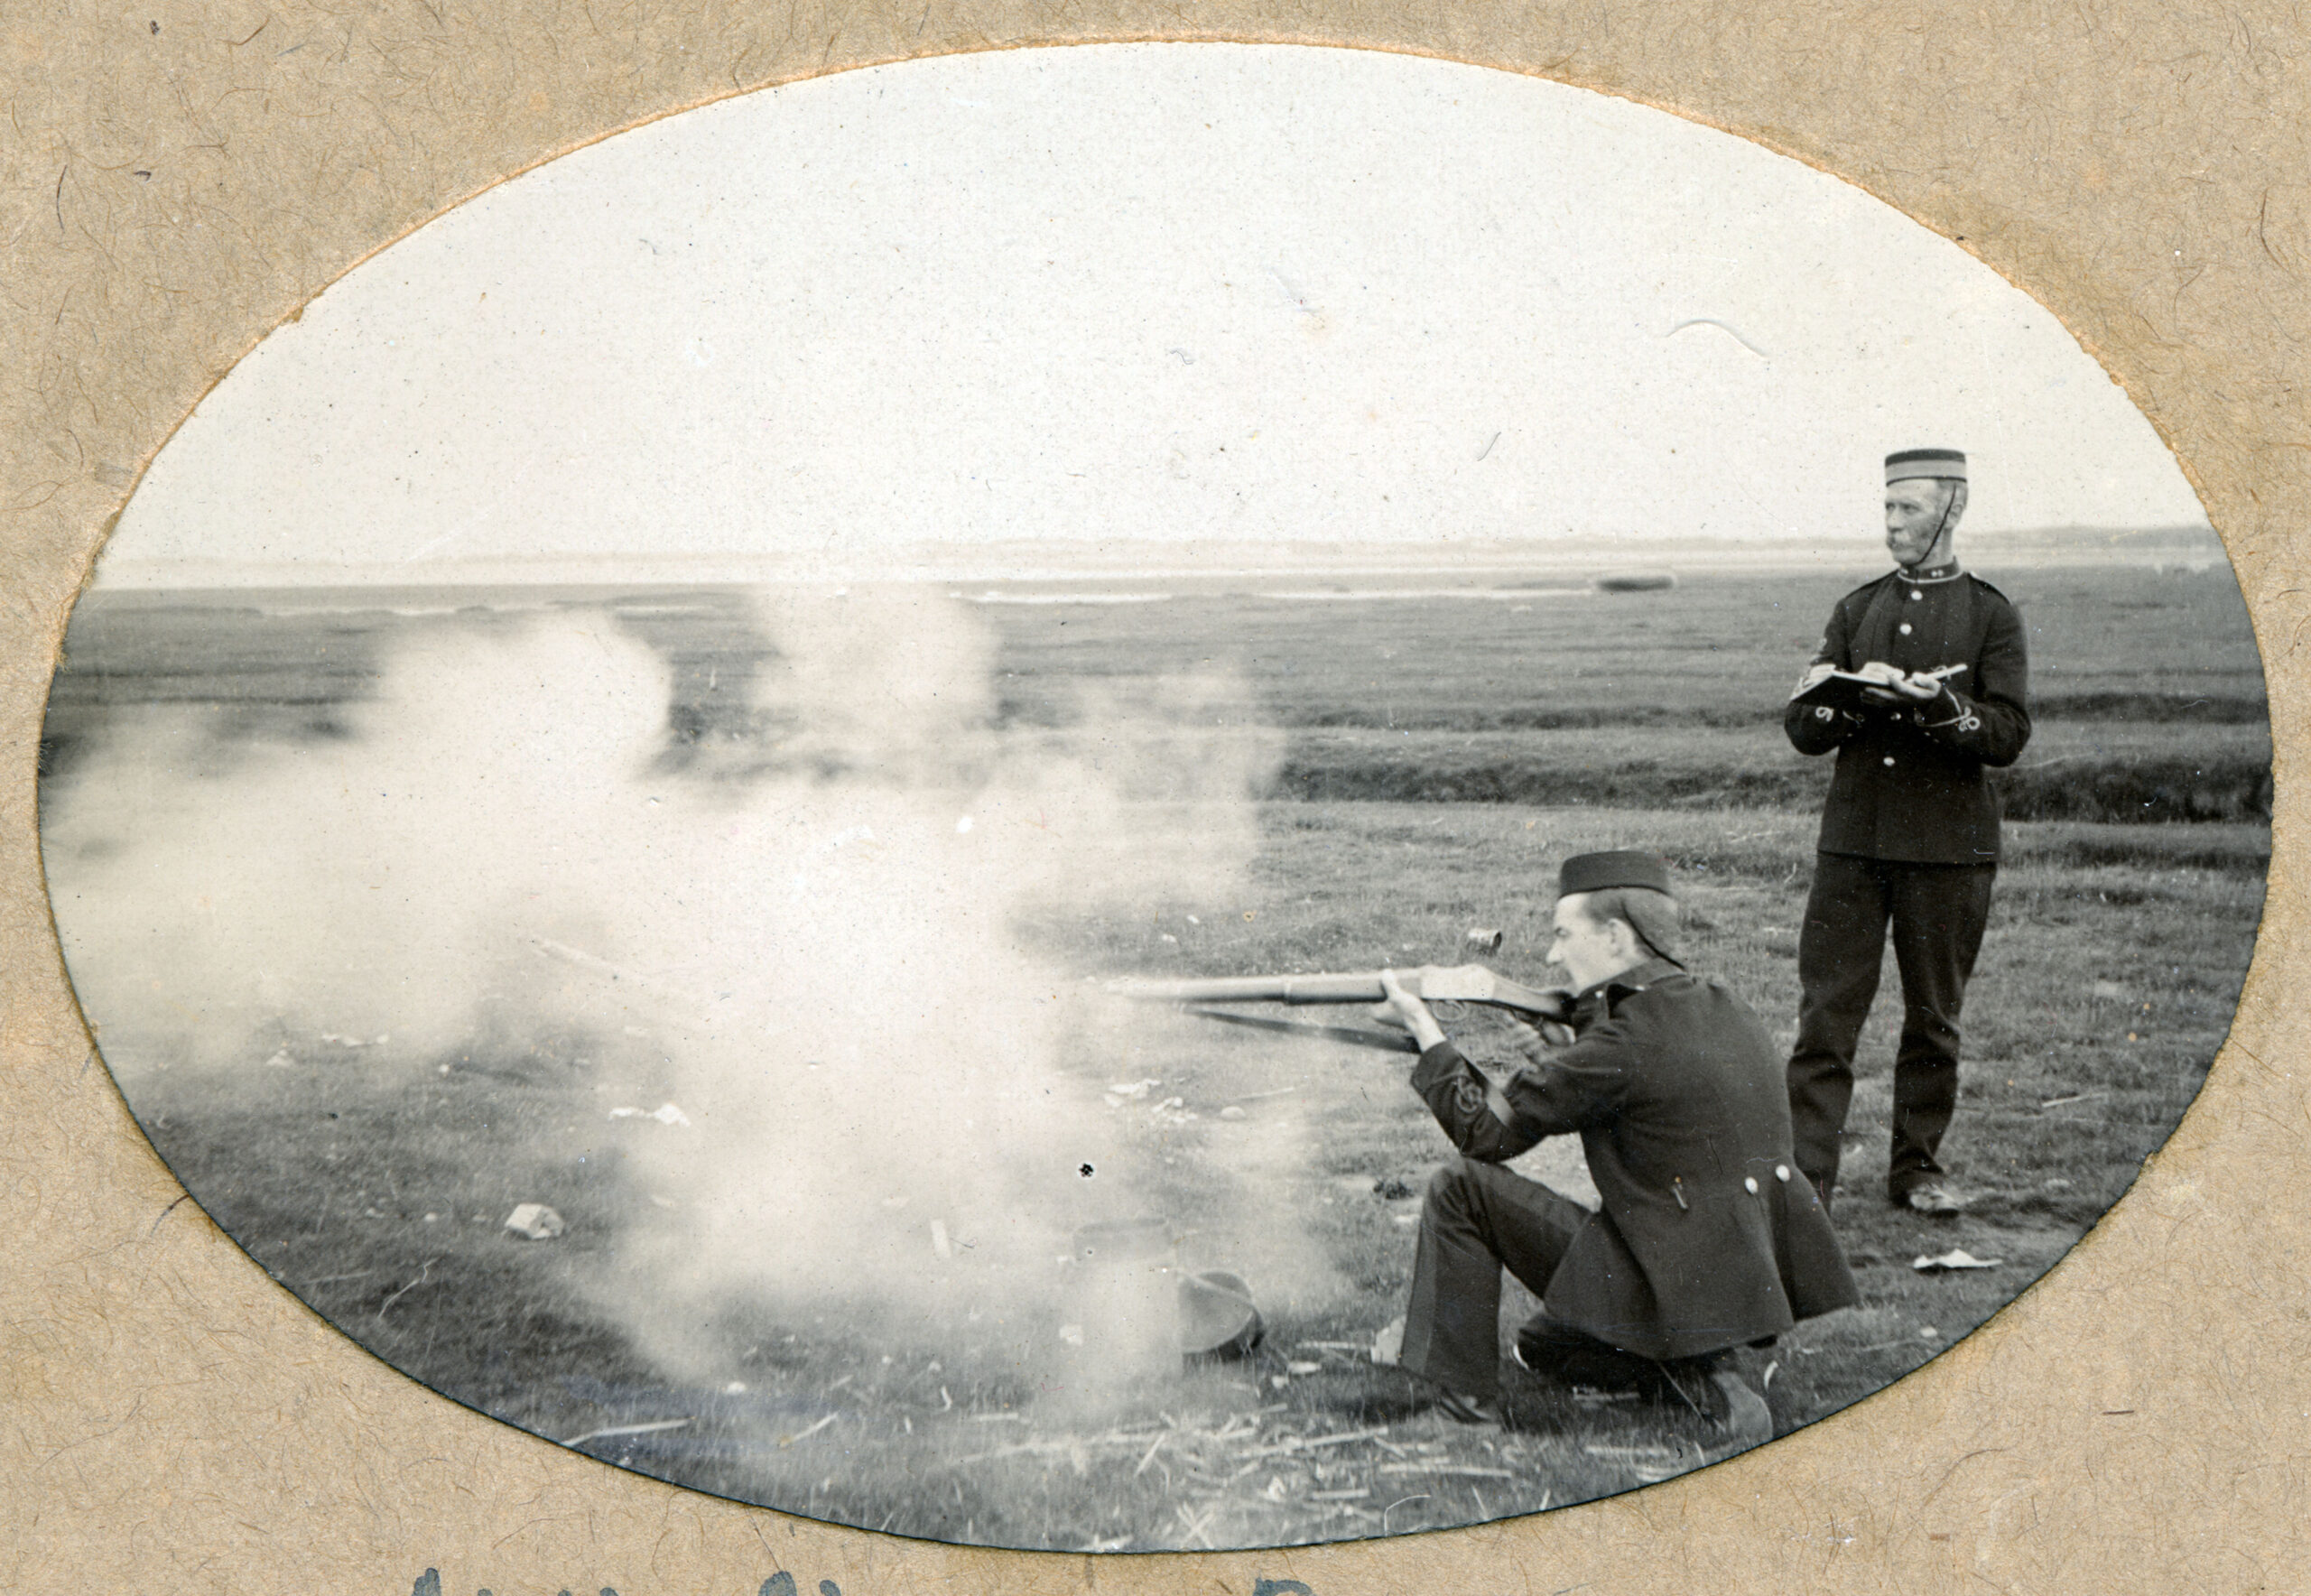 Tayport Heritage Trail - Board 19 - Shooting Competition early 1900s